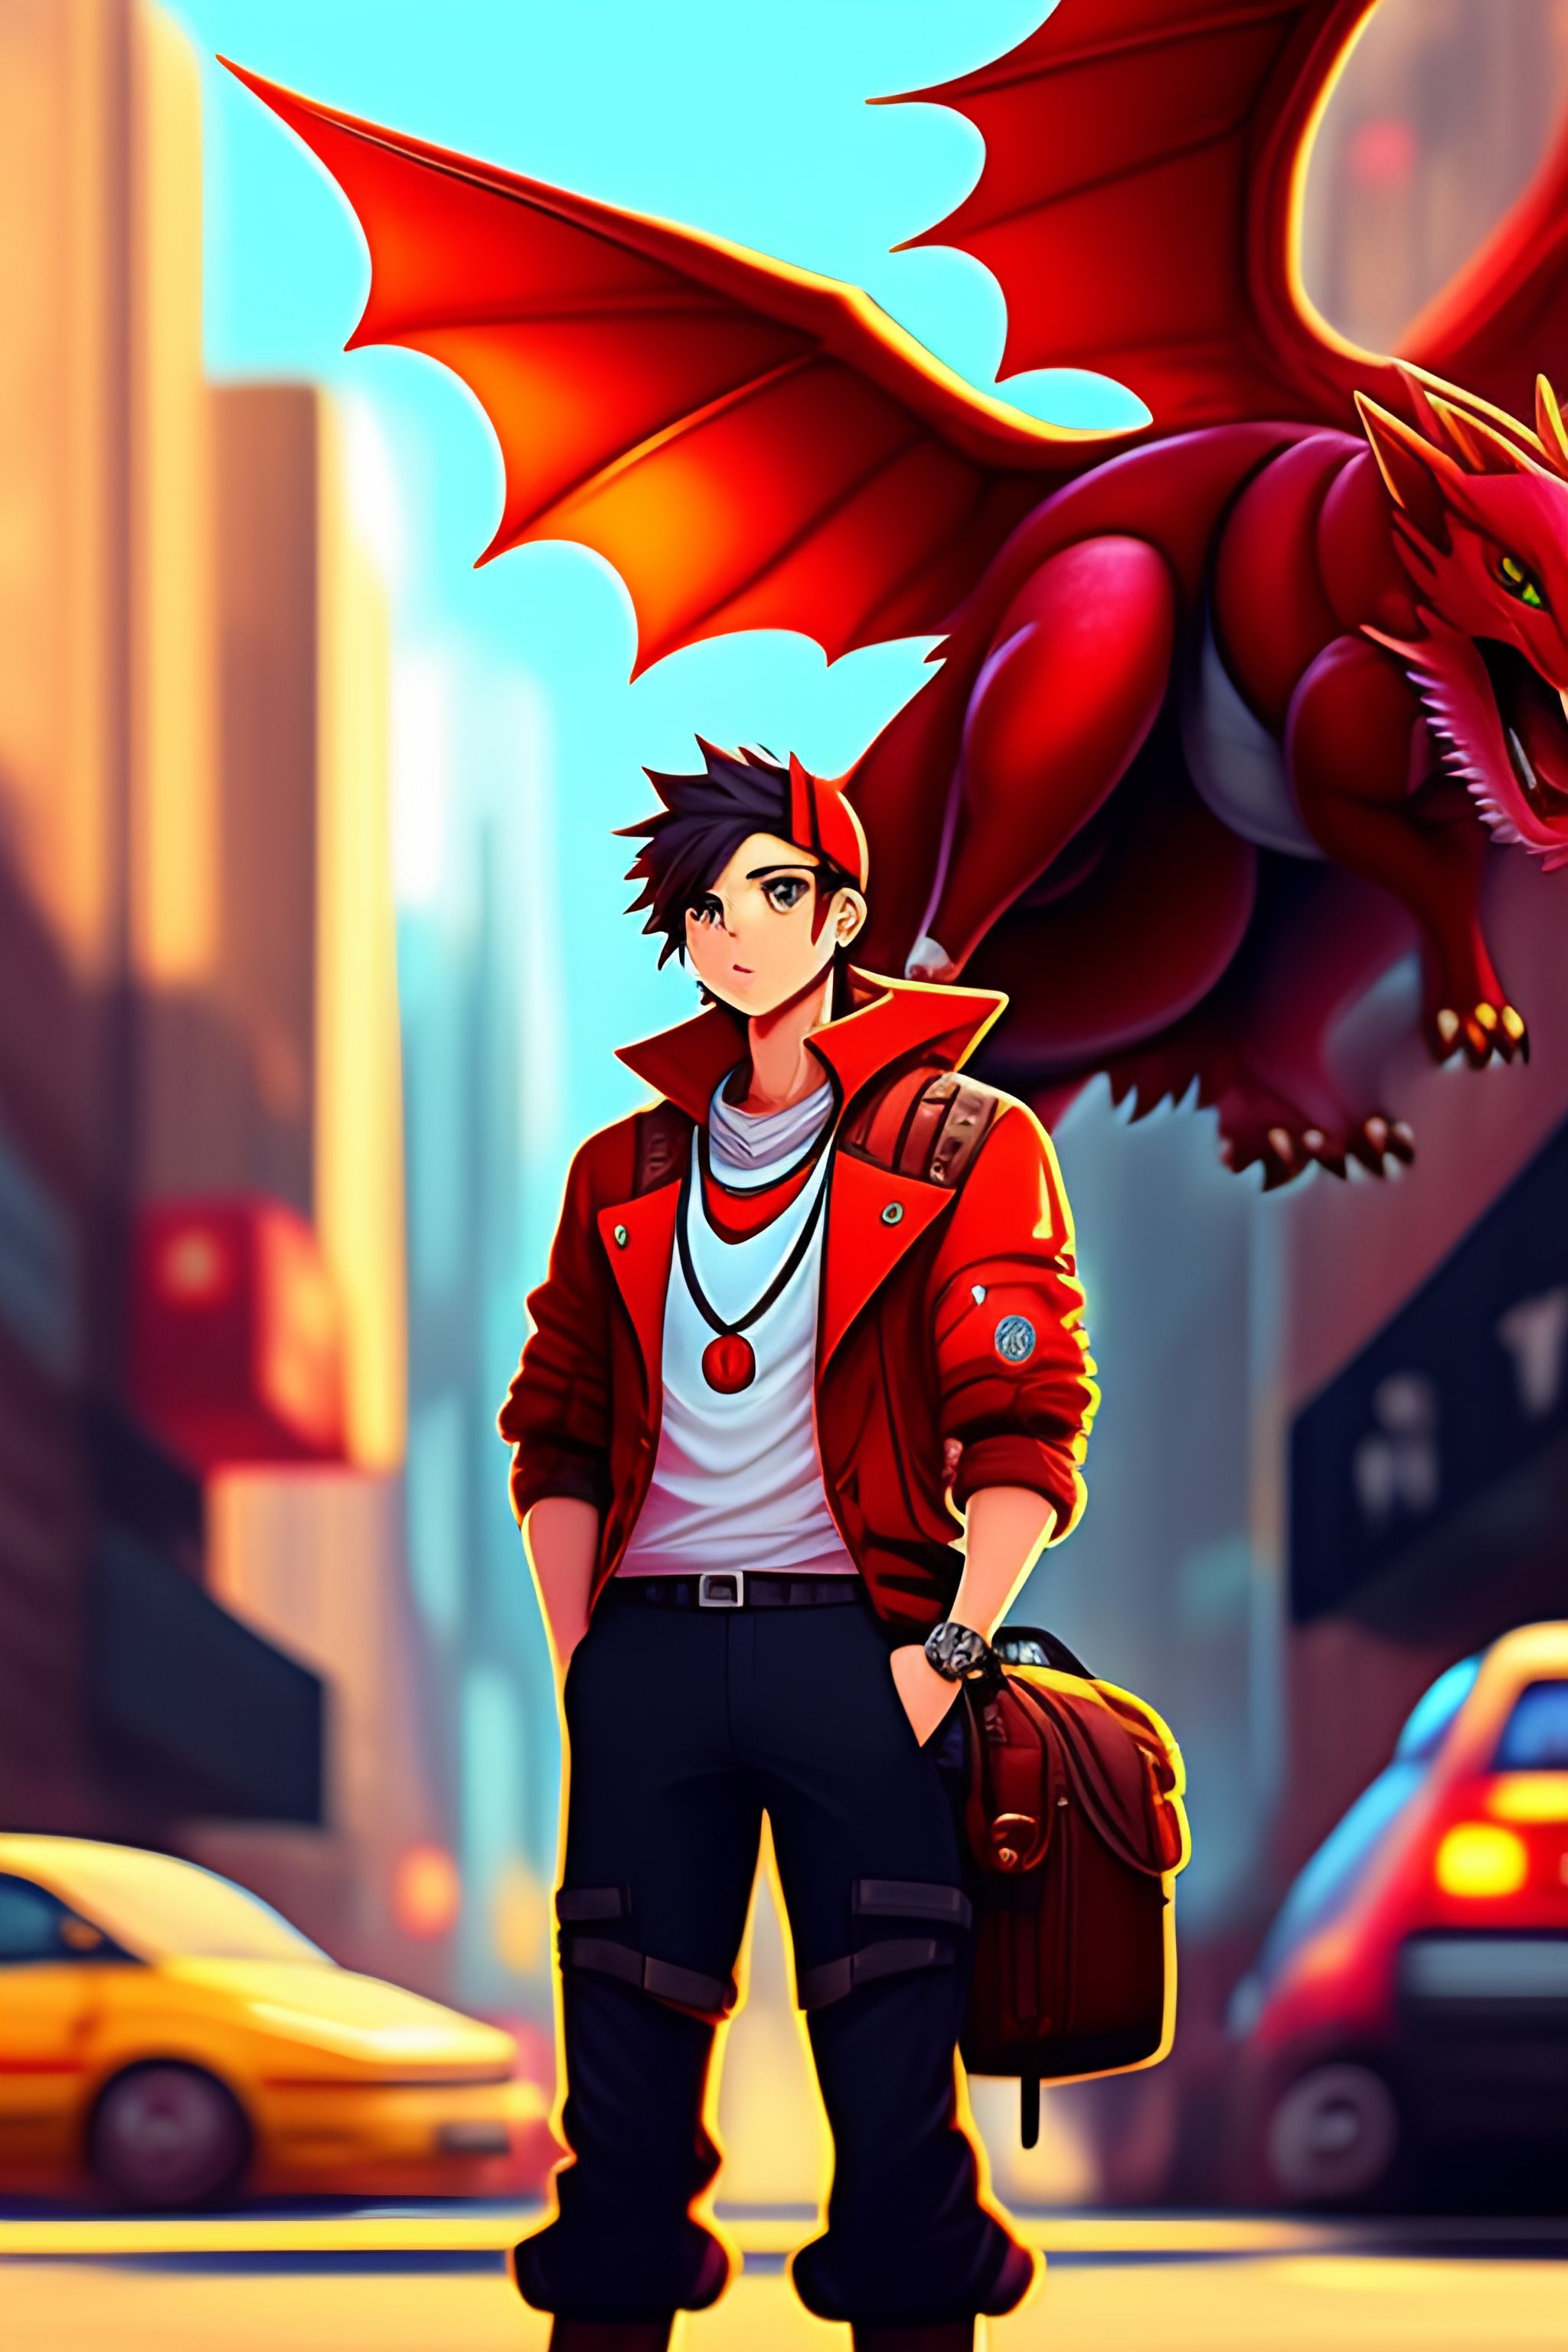 Lexica A Picture Of A Full Body Male Pokemon Trainer In Red With A Flying Dragon In A Neo Punk 0718